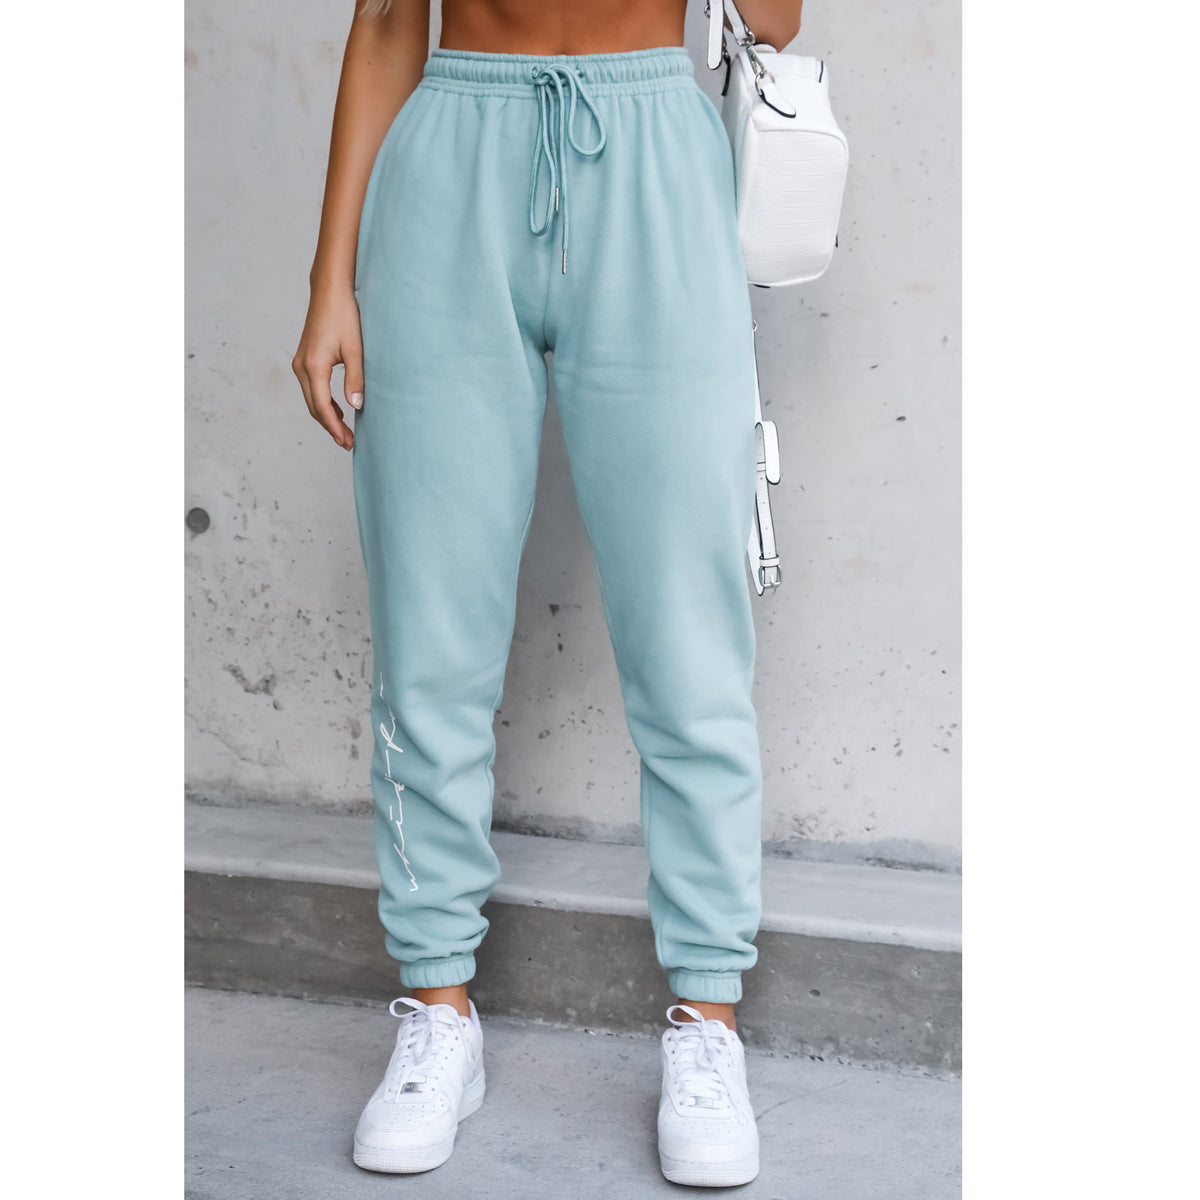 How To Wear Sweatpants That Are Too Short? – solowomen